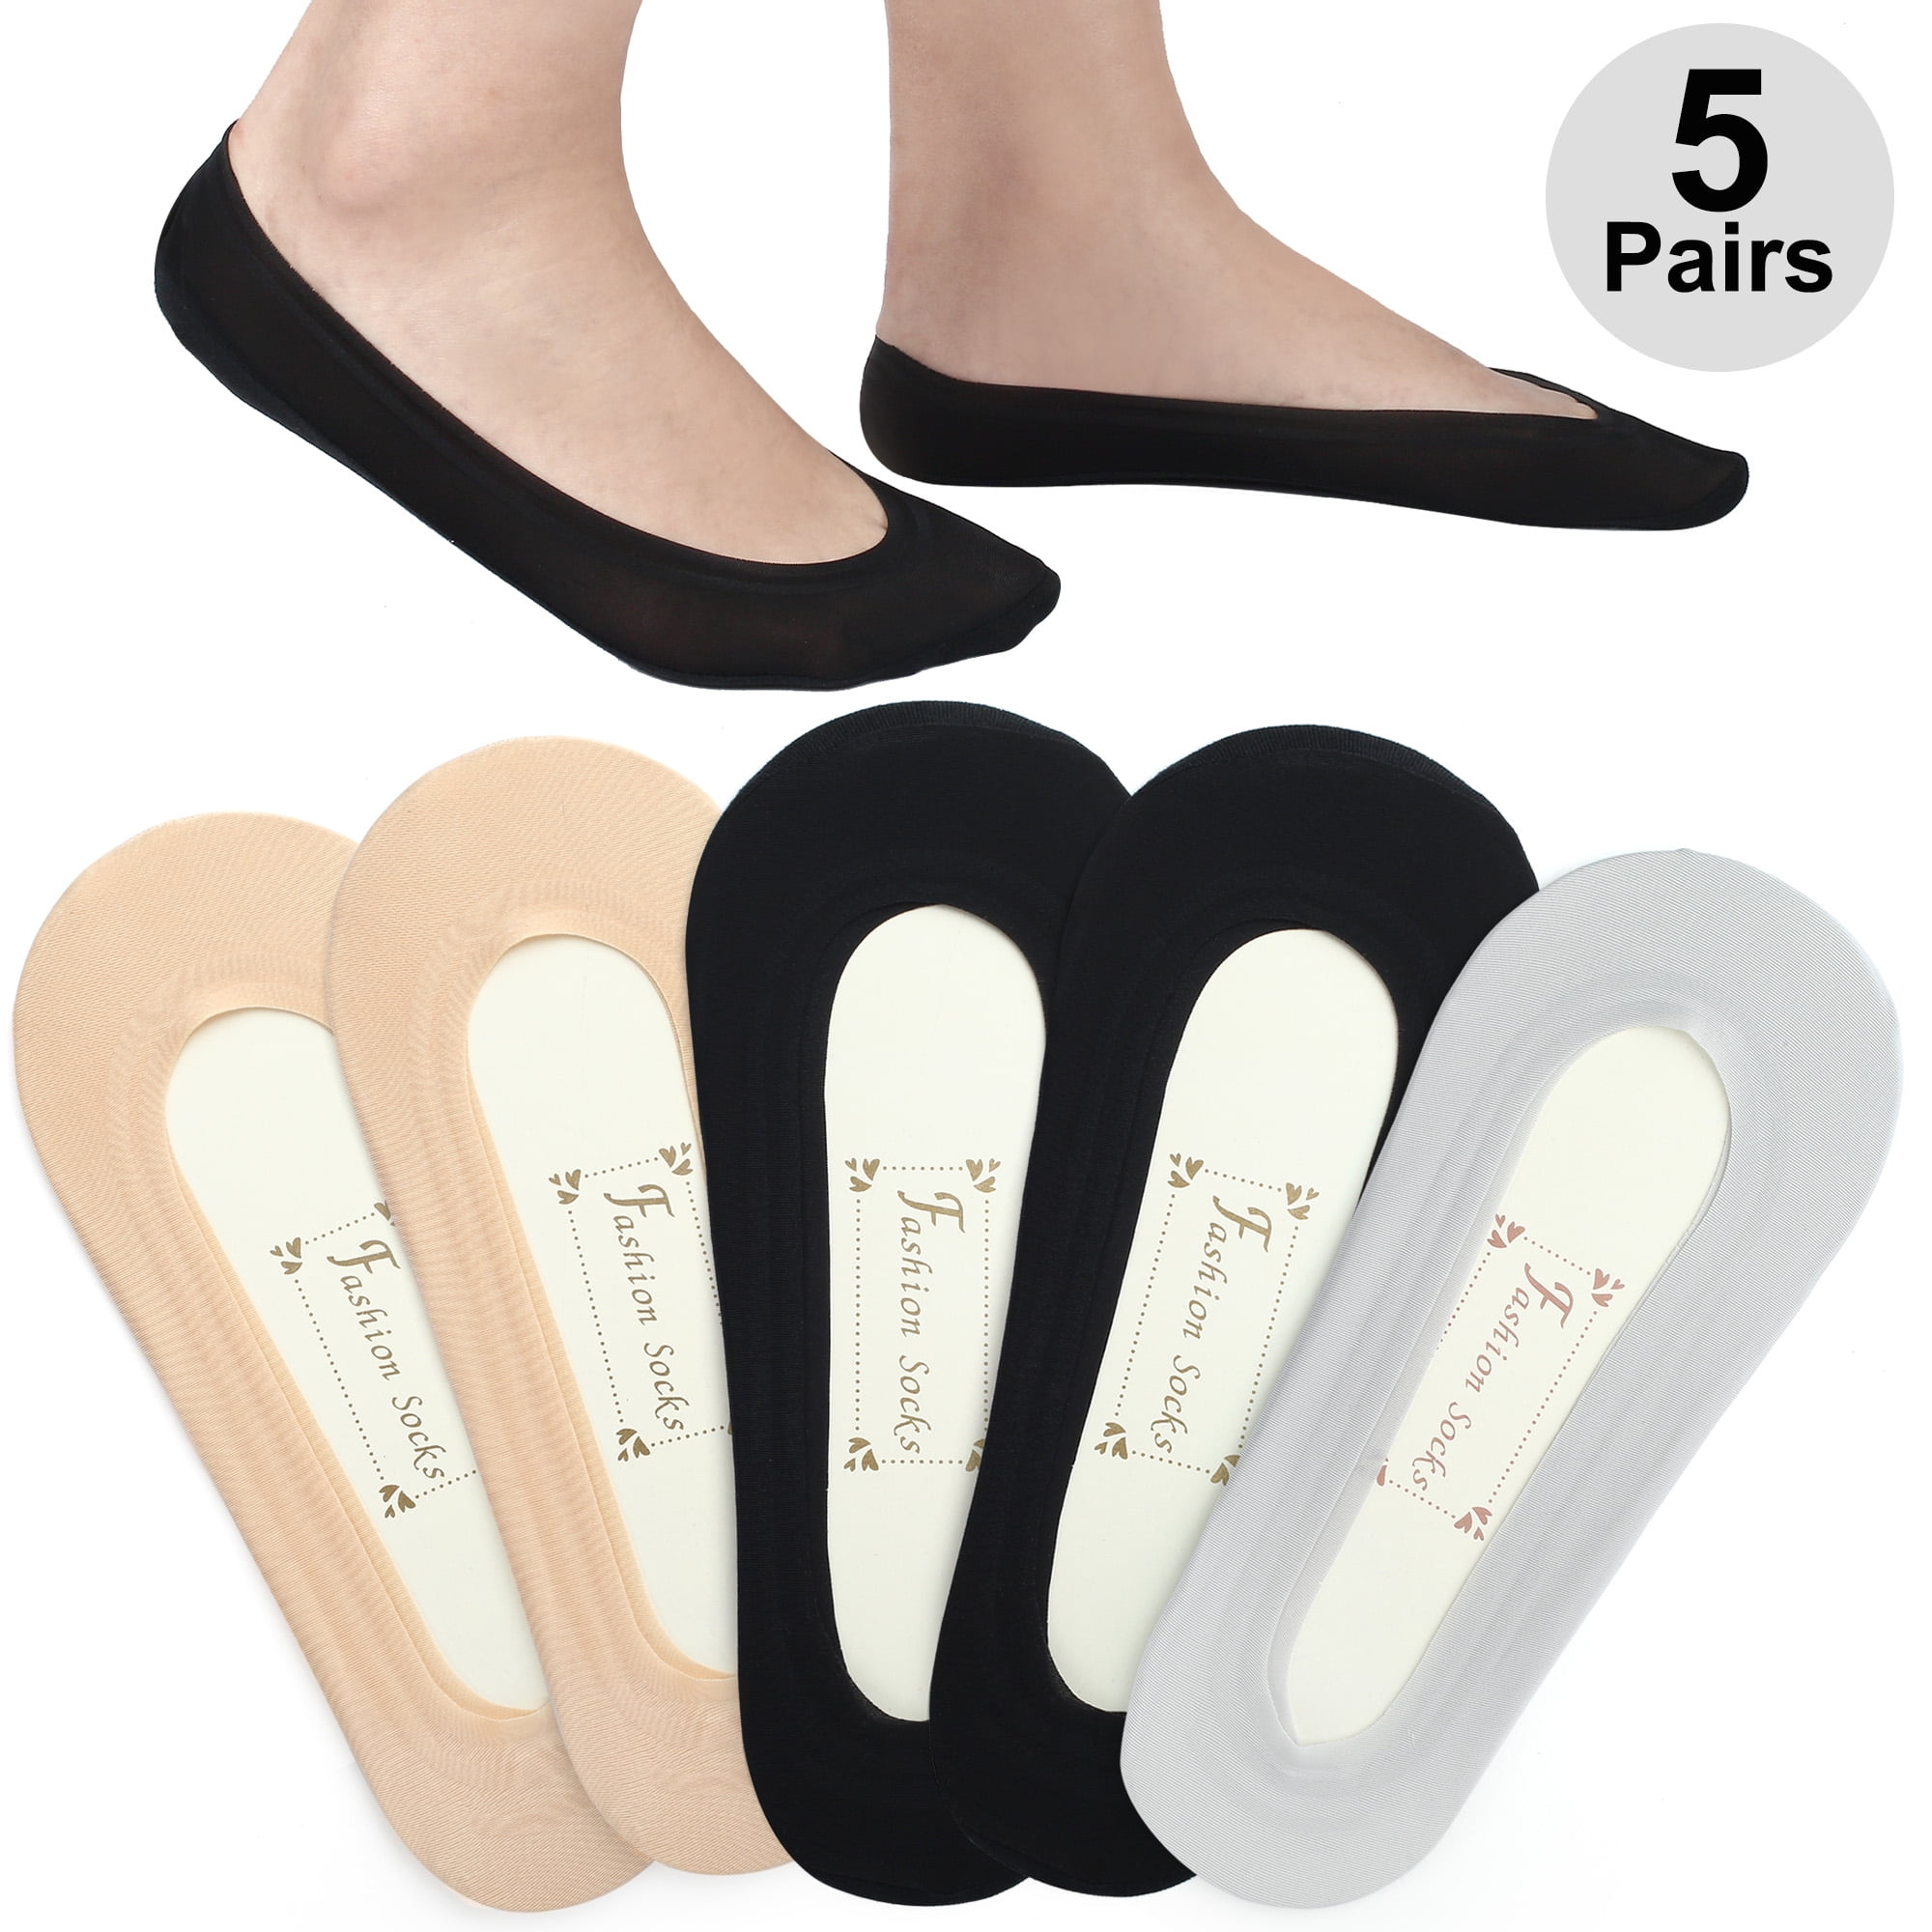 3-6 Pairs Womens No Show Socks Non Slip Cotton Invisible Hidden Thin Liner Socks for Flats Heels 